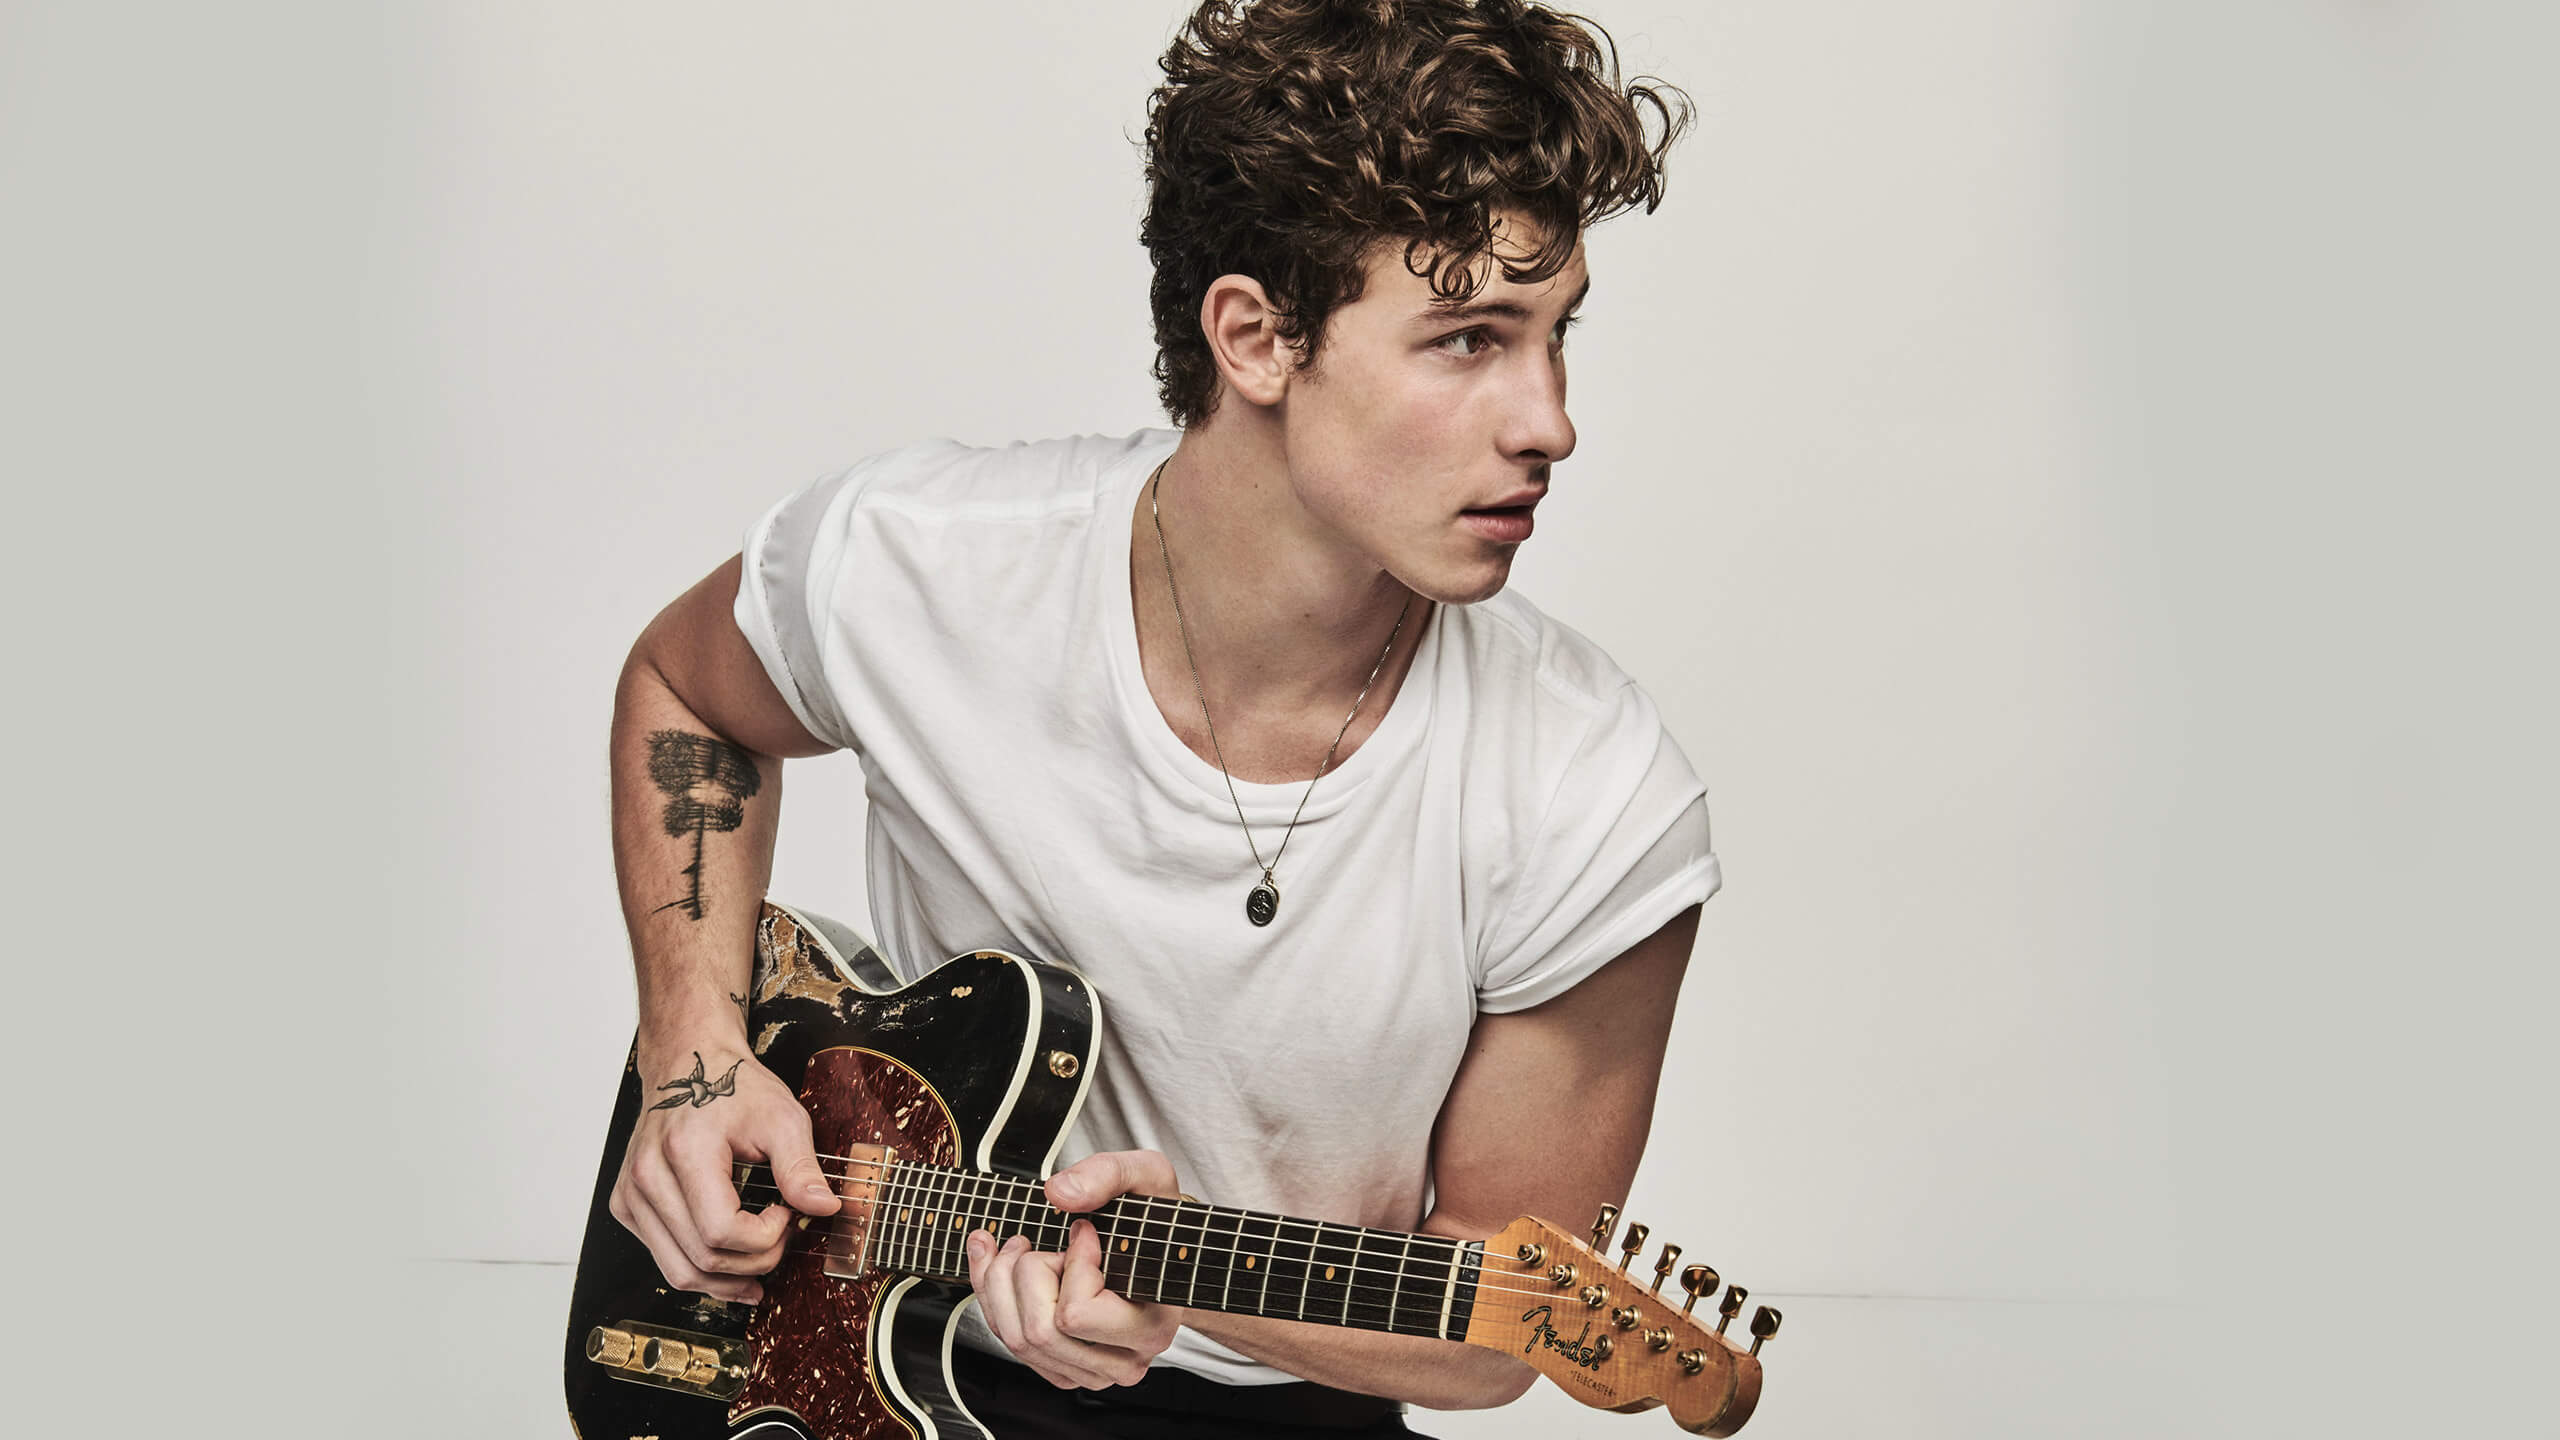 Shawn Mendes Universal music